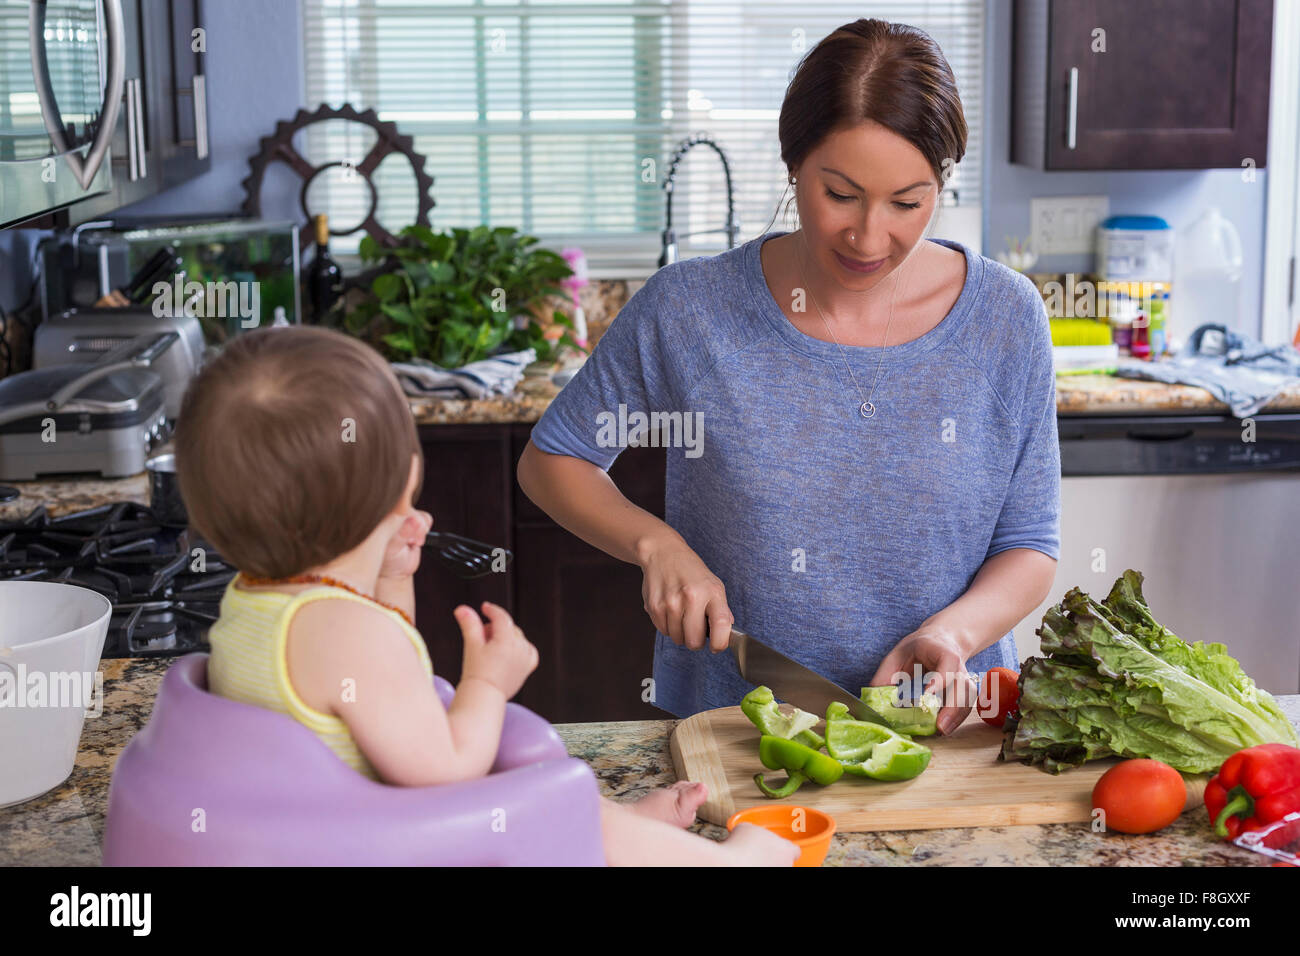 Mixed race mother chopping vegetables with daughter in kitchen Stock Photo